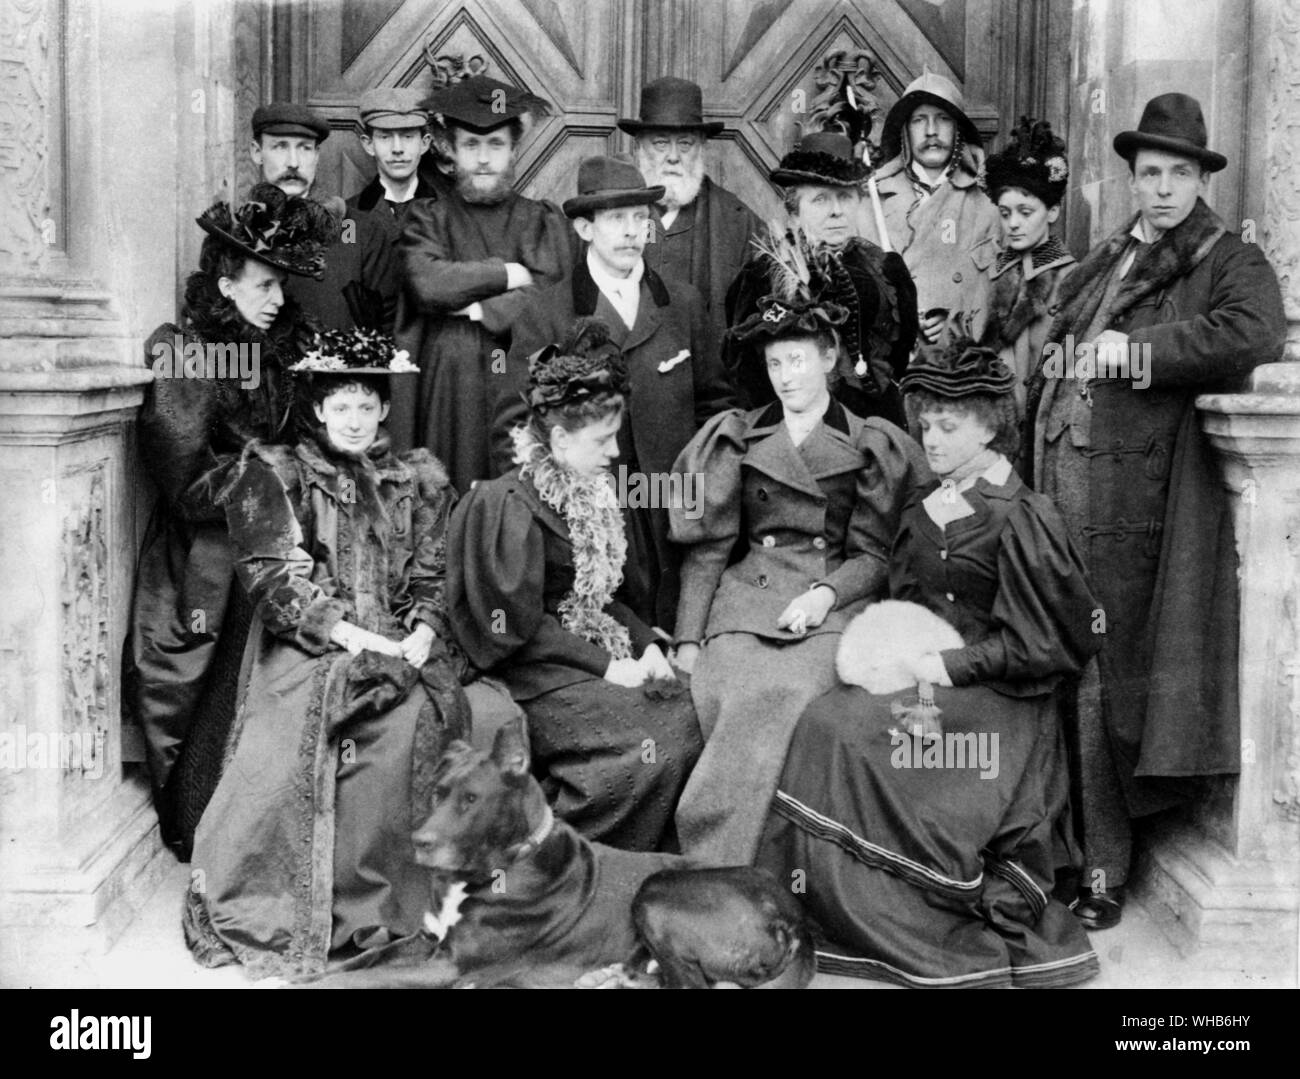 Salisbury Family in 1896. Top row, left to right: Lord Selborne, Lord Hugh Cecil, Lord William Cecil, Lord Salisbury, Lady Salisbury, Lord Edward Ceci Stock Photo